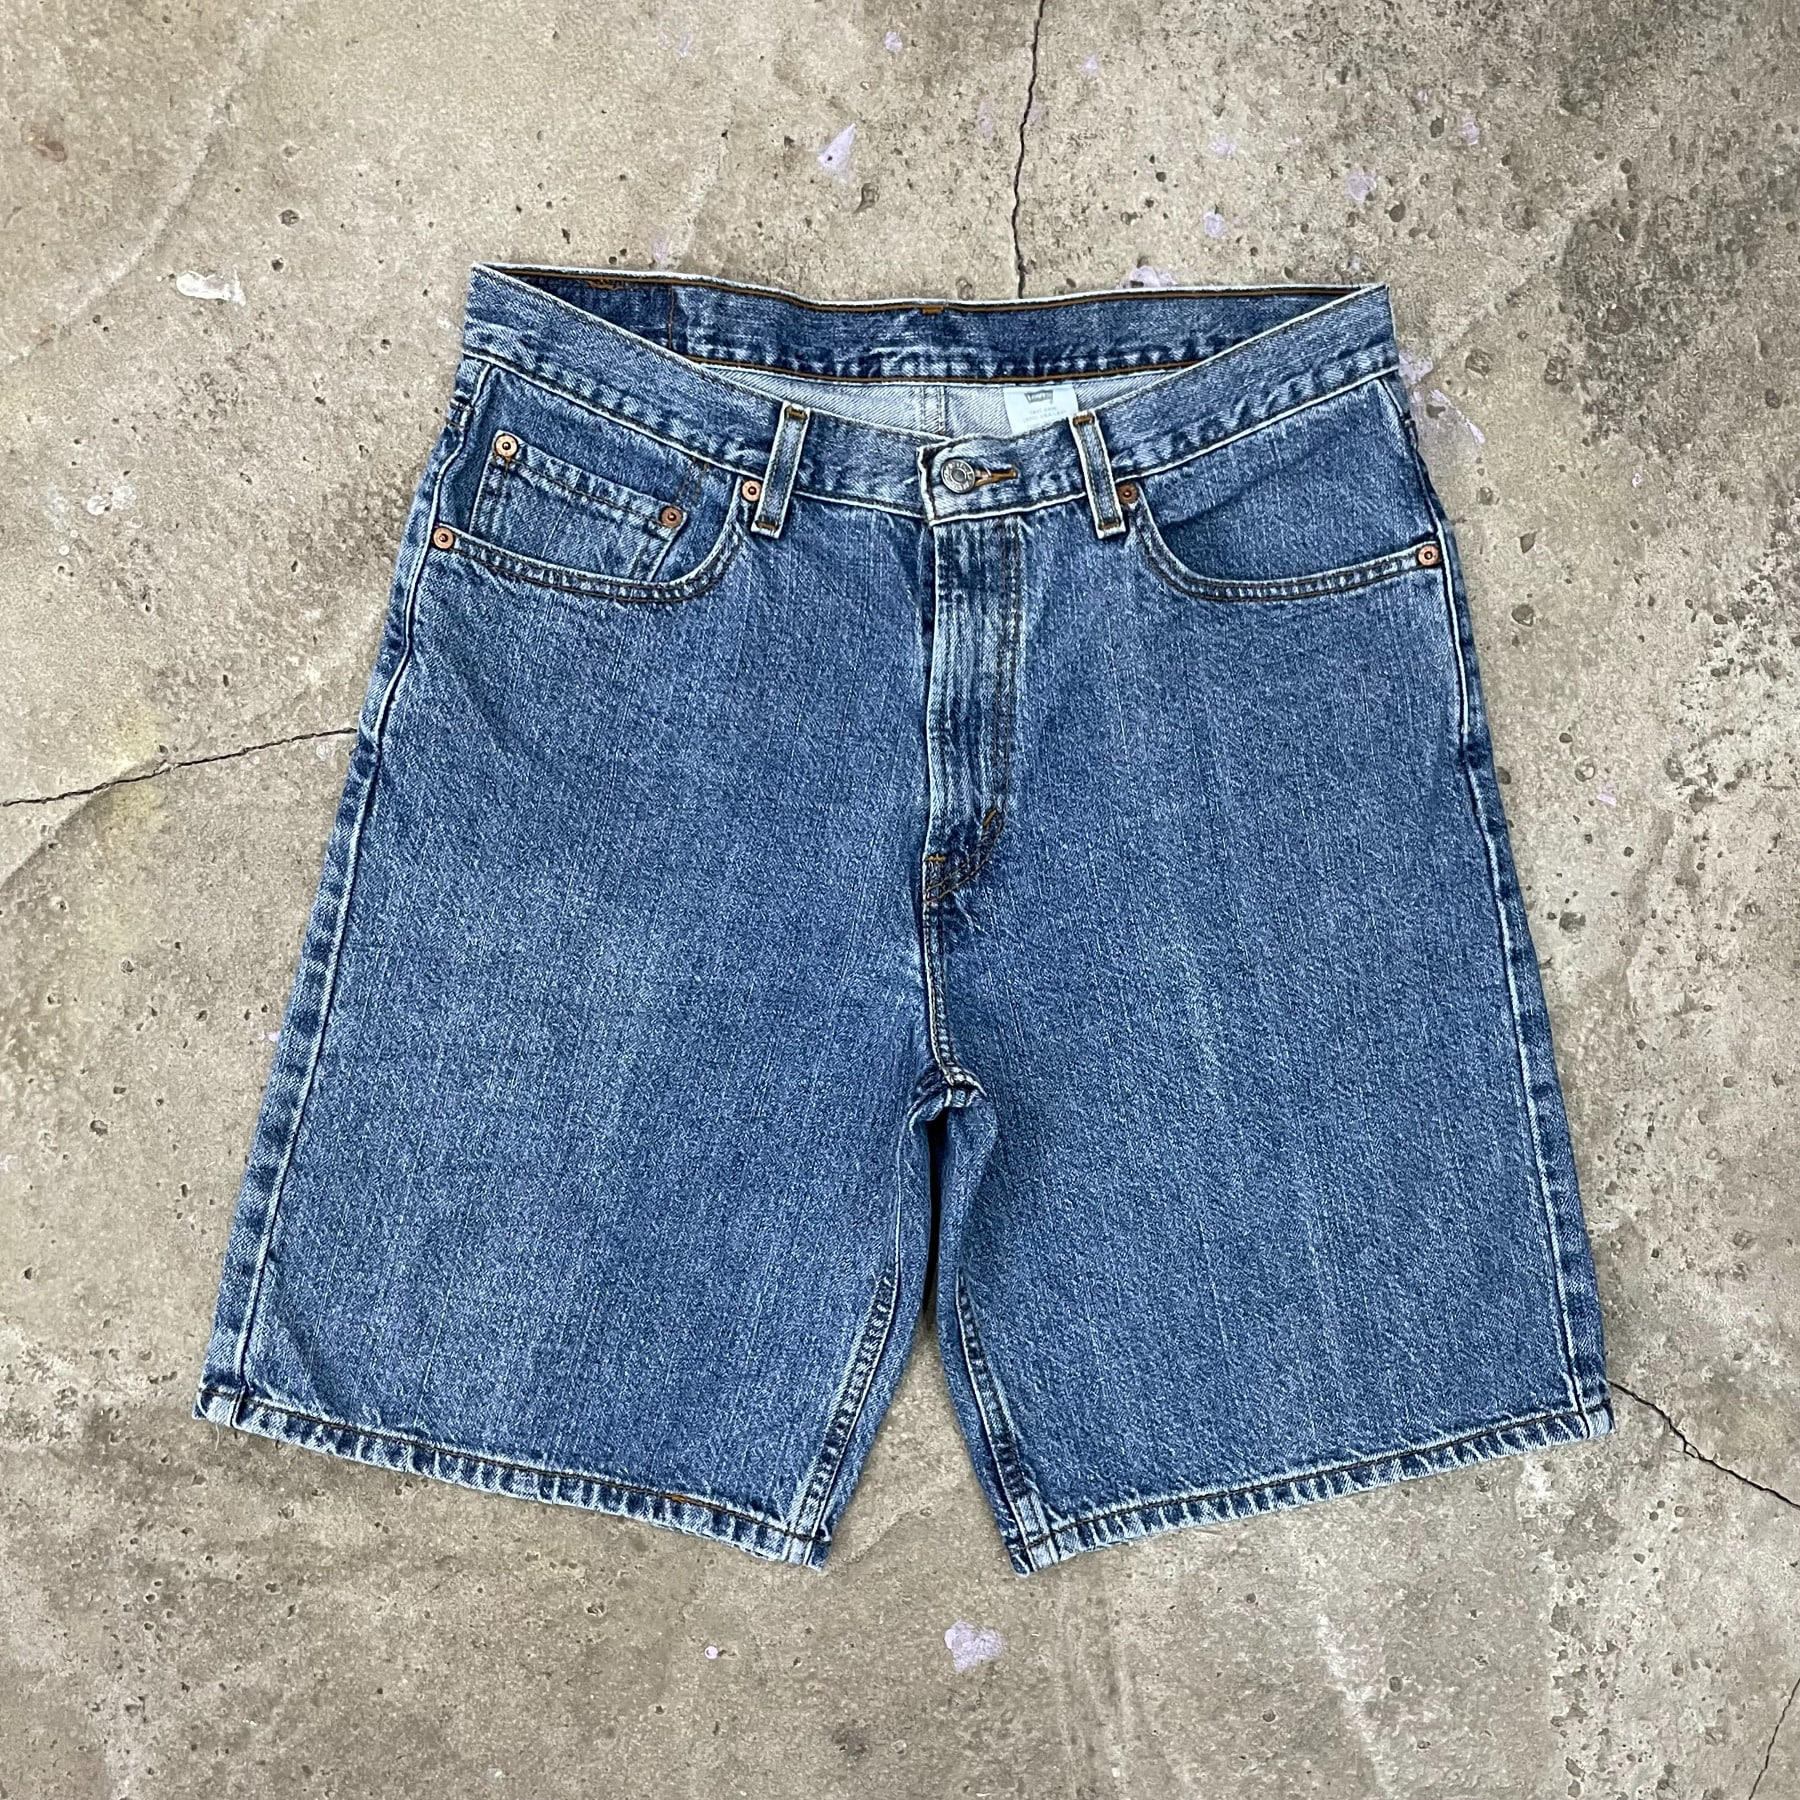 00&#039;s Levis 550 Shorts - 34inch